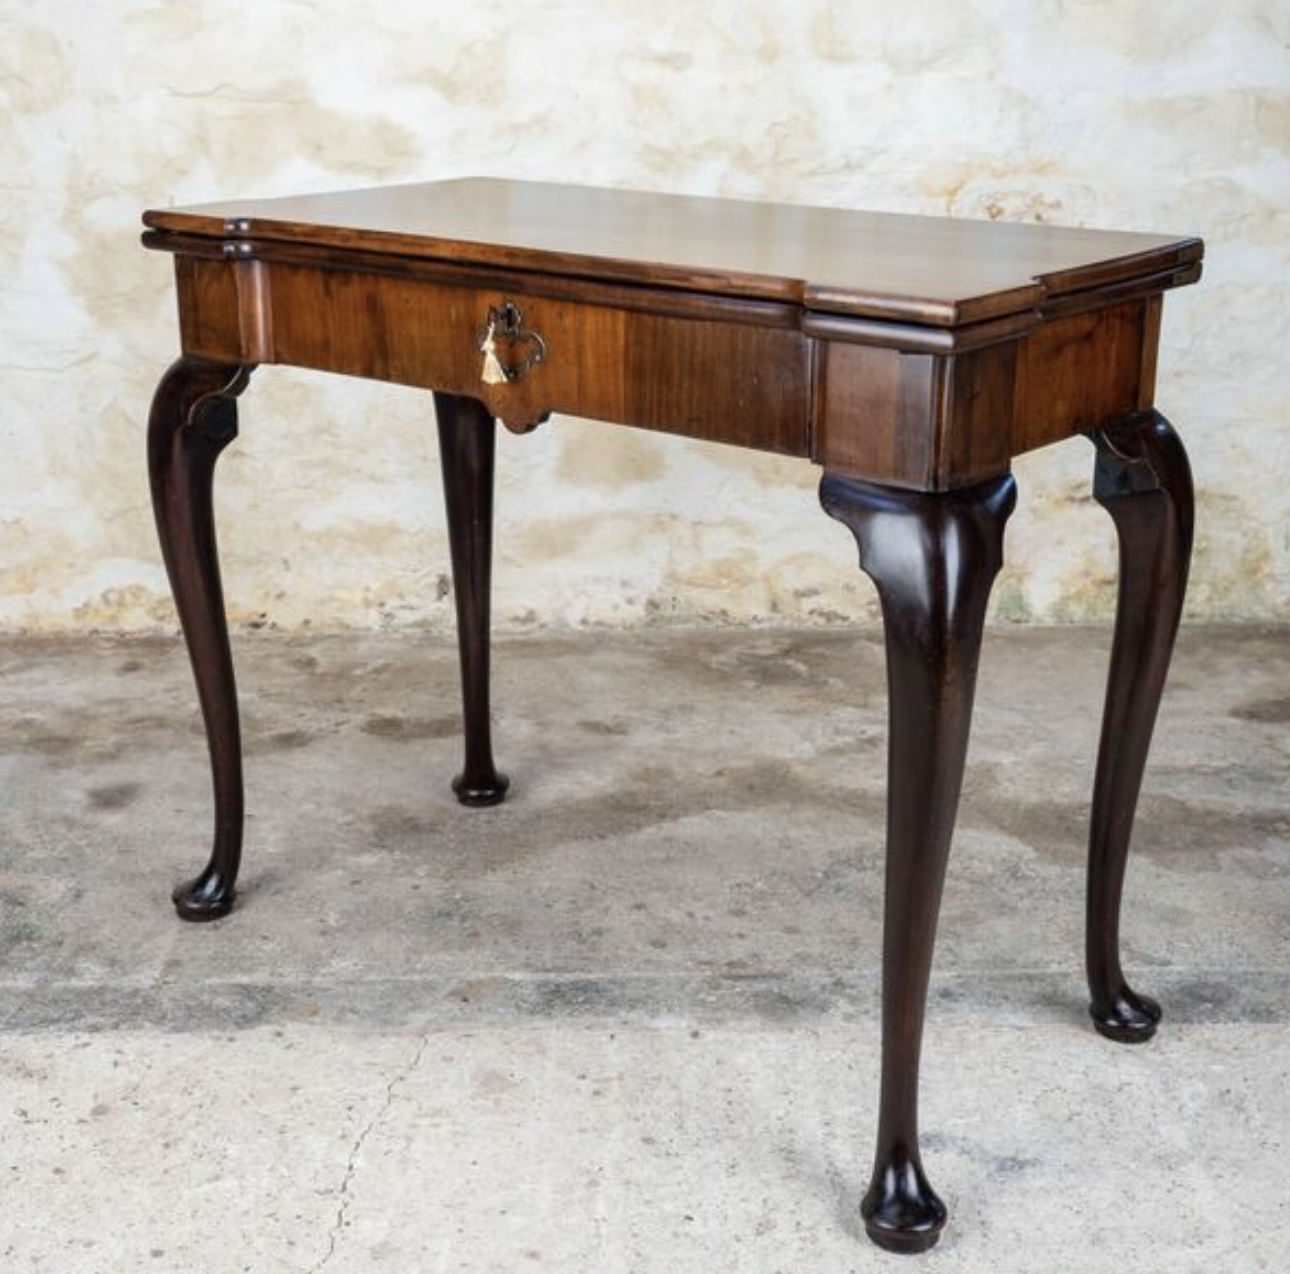 Antique console with cabriole legs